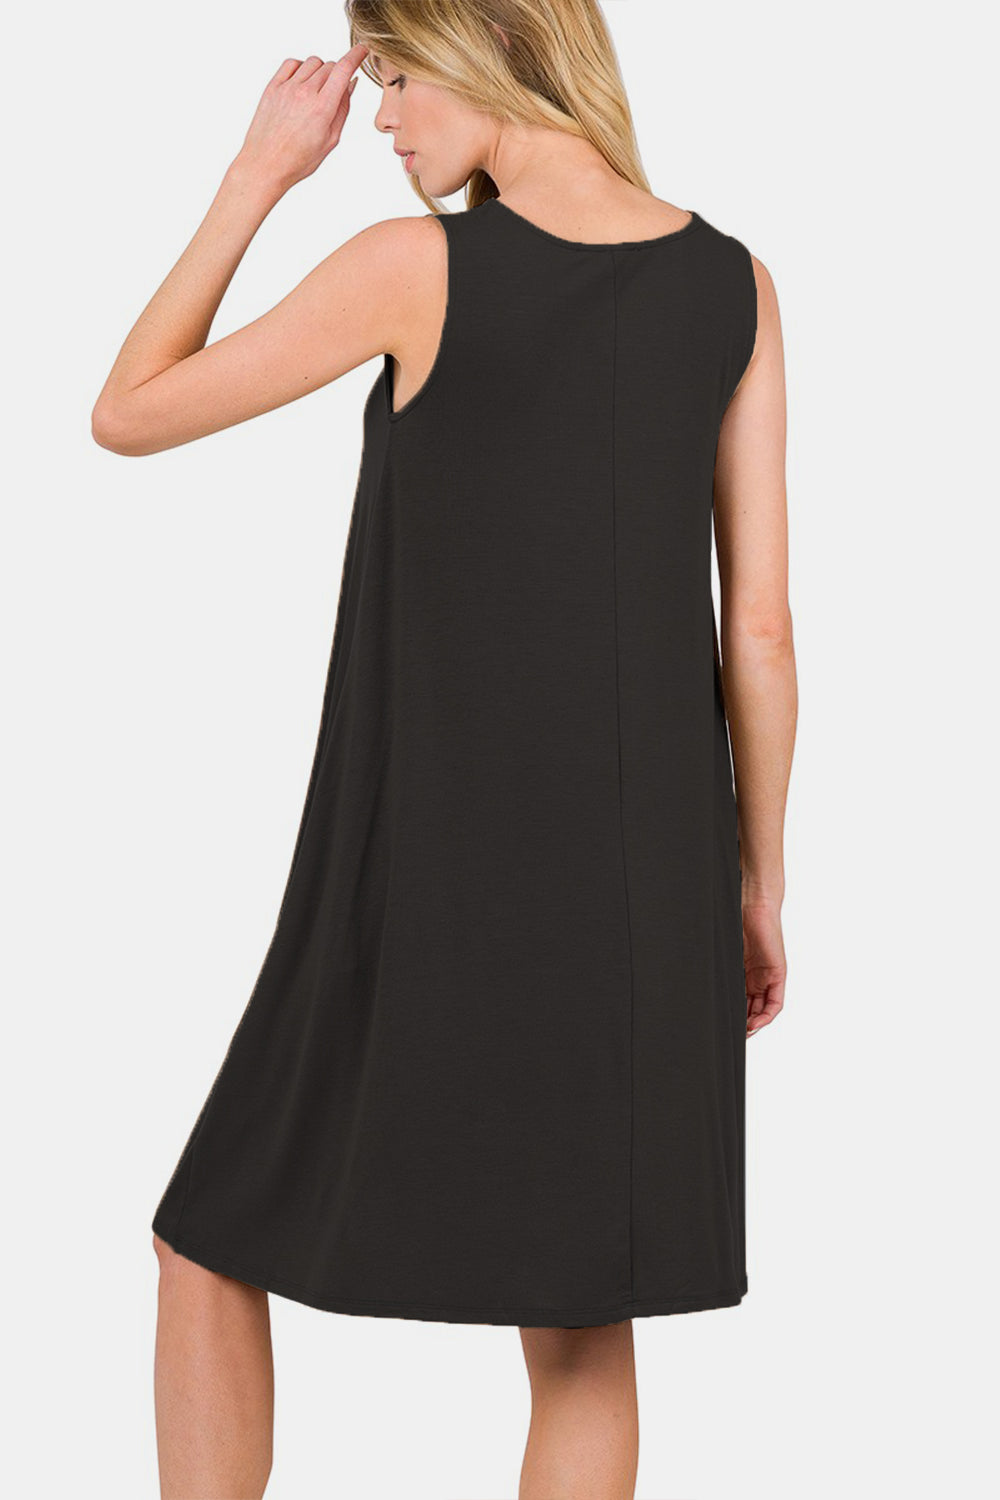 Zenana Sleeveless Flared Dress with Side Pockets in Black Southern Soul Collectives